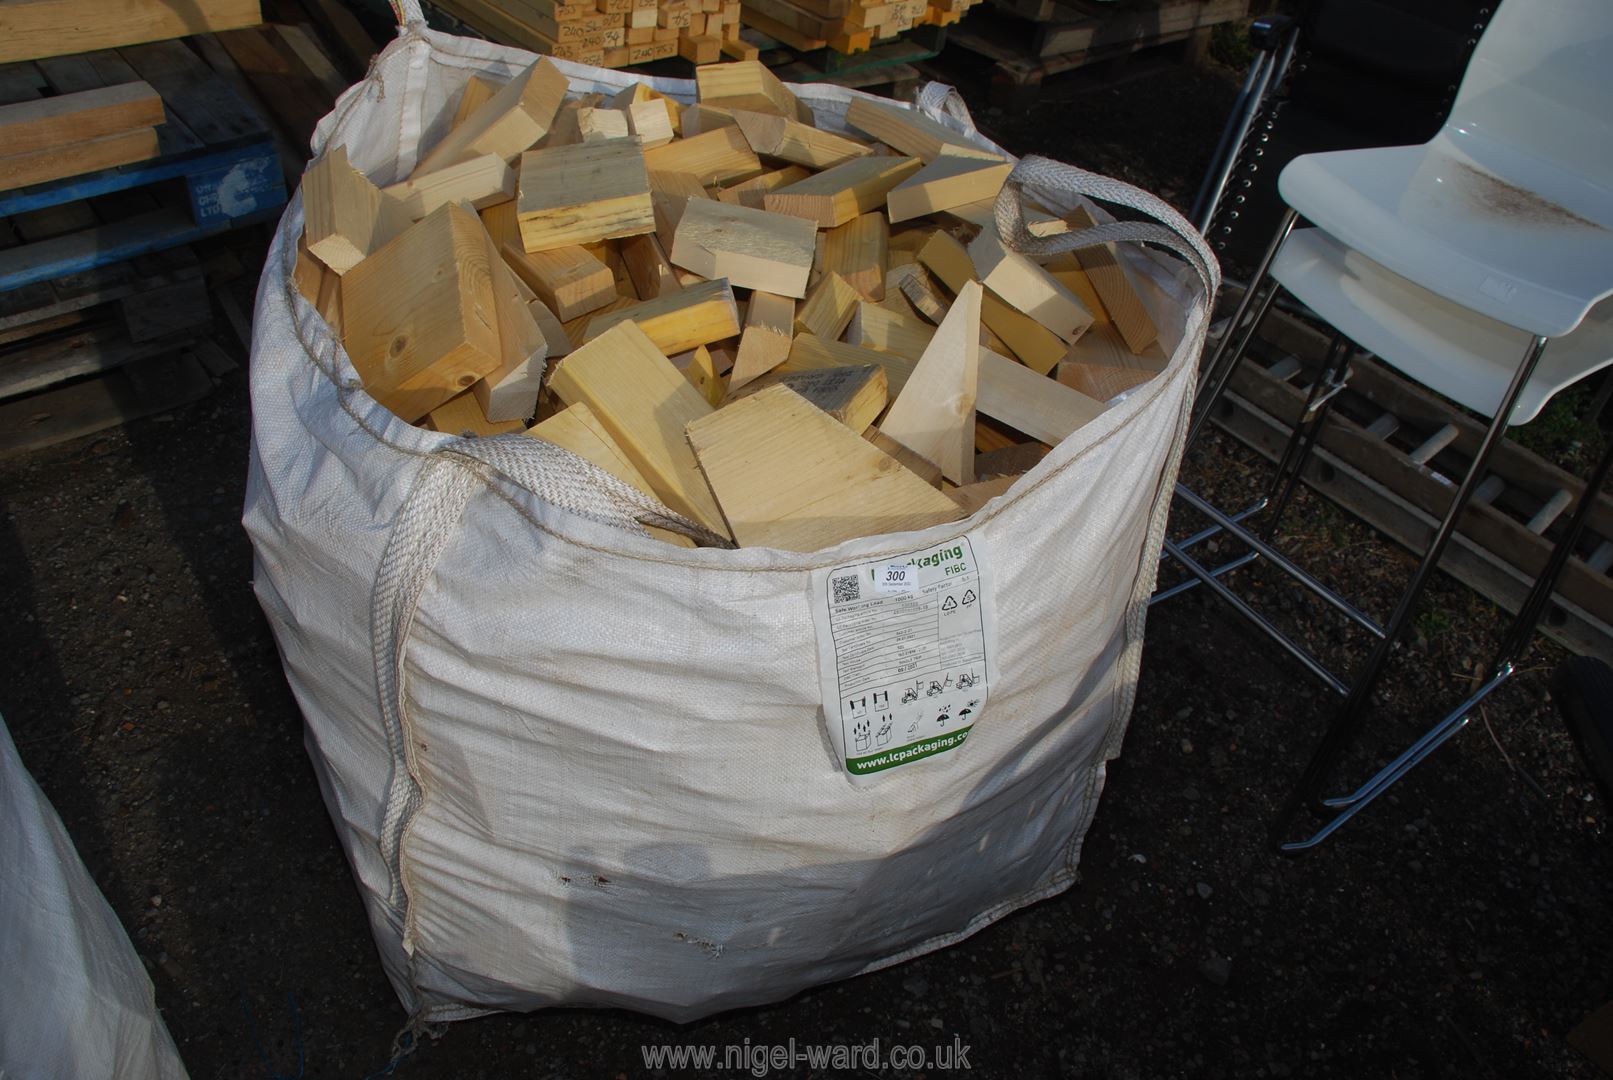 A builder's bag of softwood off-cuts (blocks).